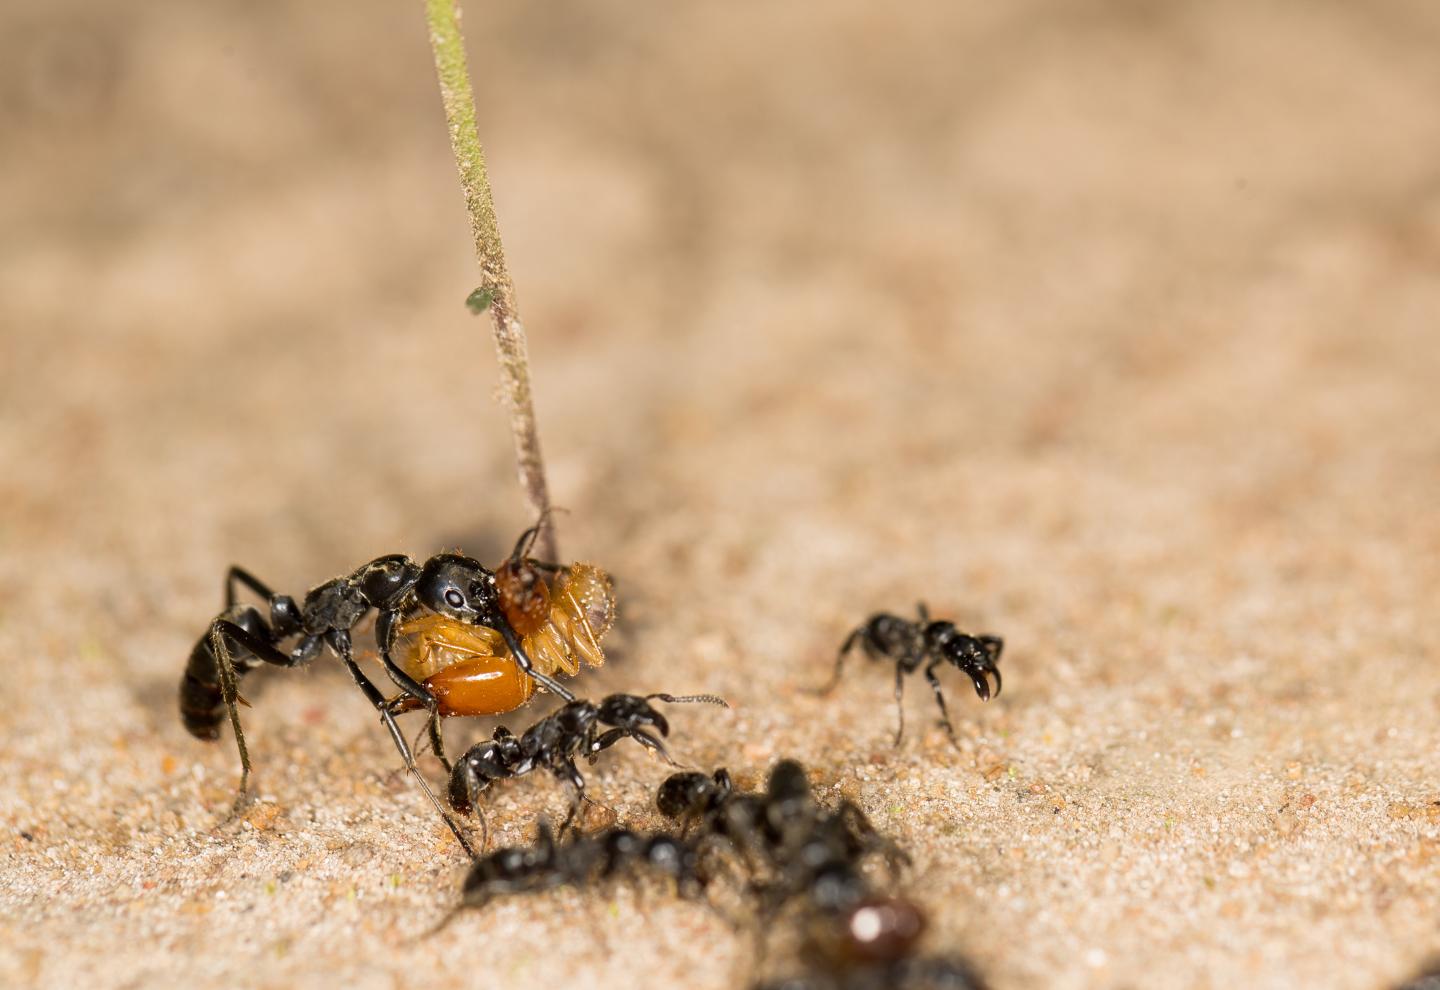 Soldier Ants Come To The Rescue Of Wounded Comrades